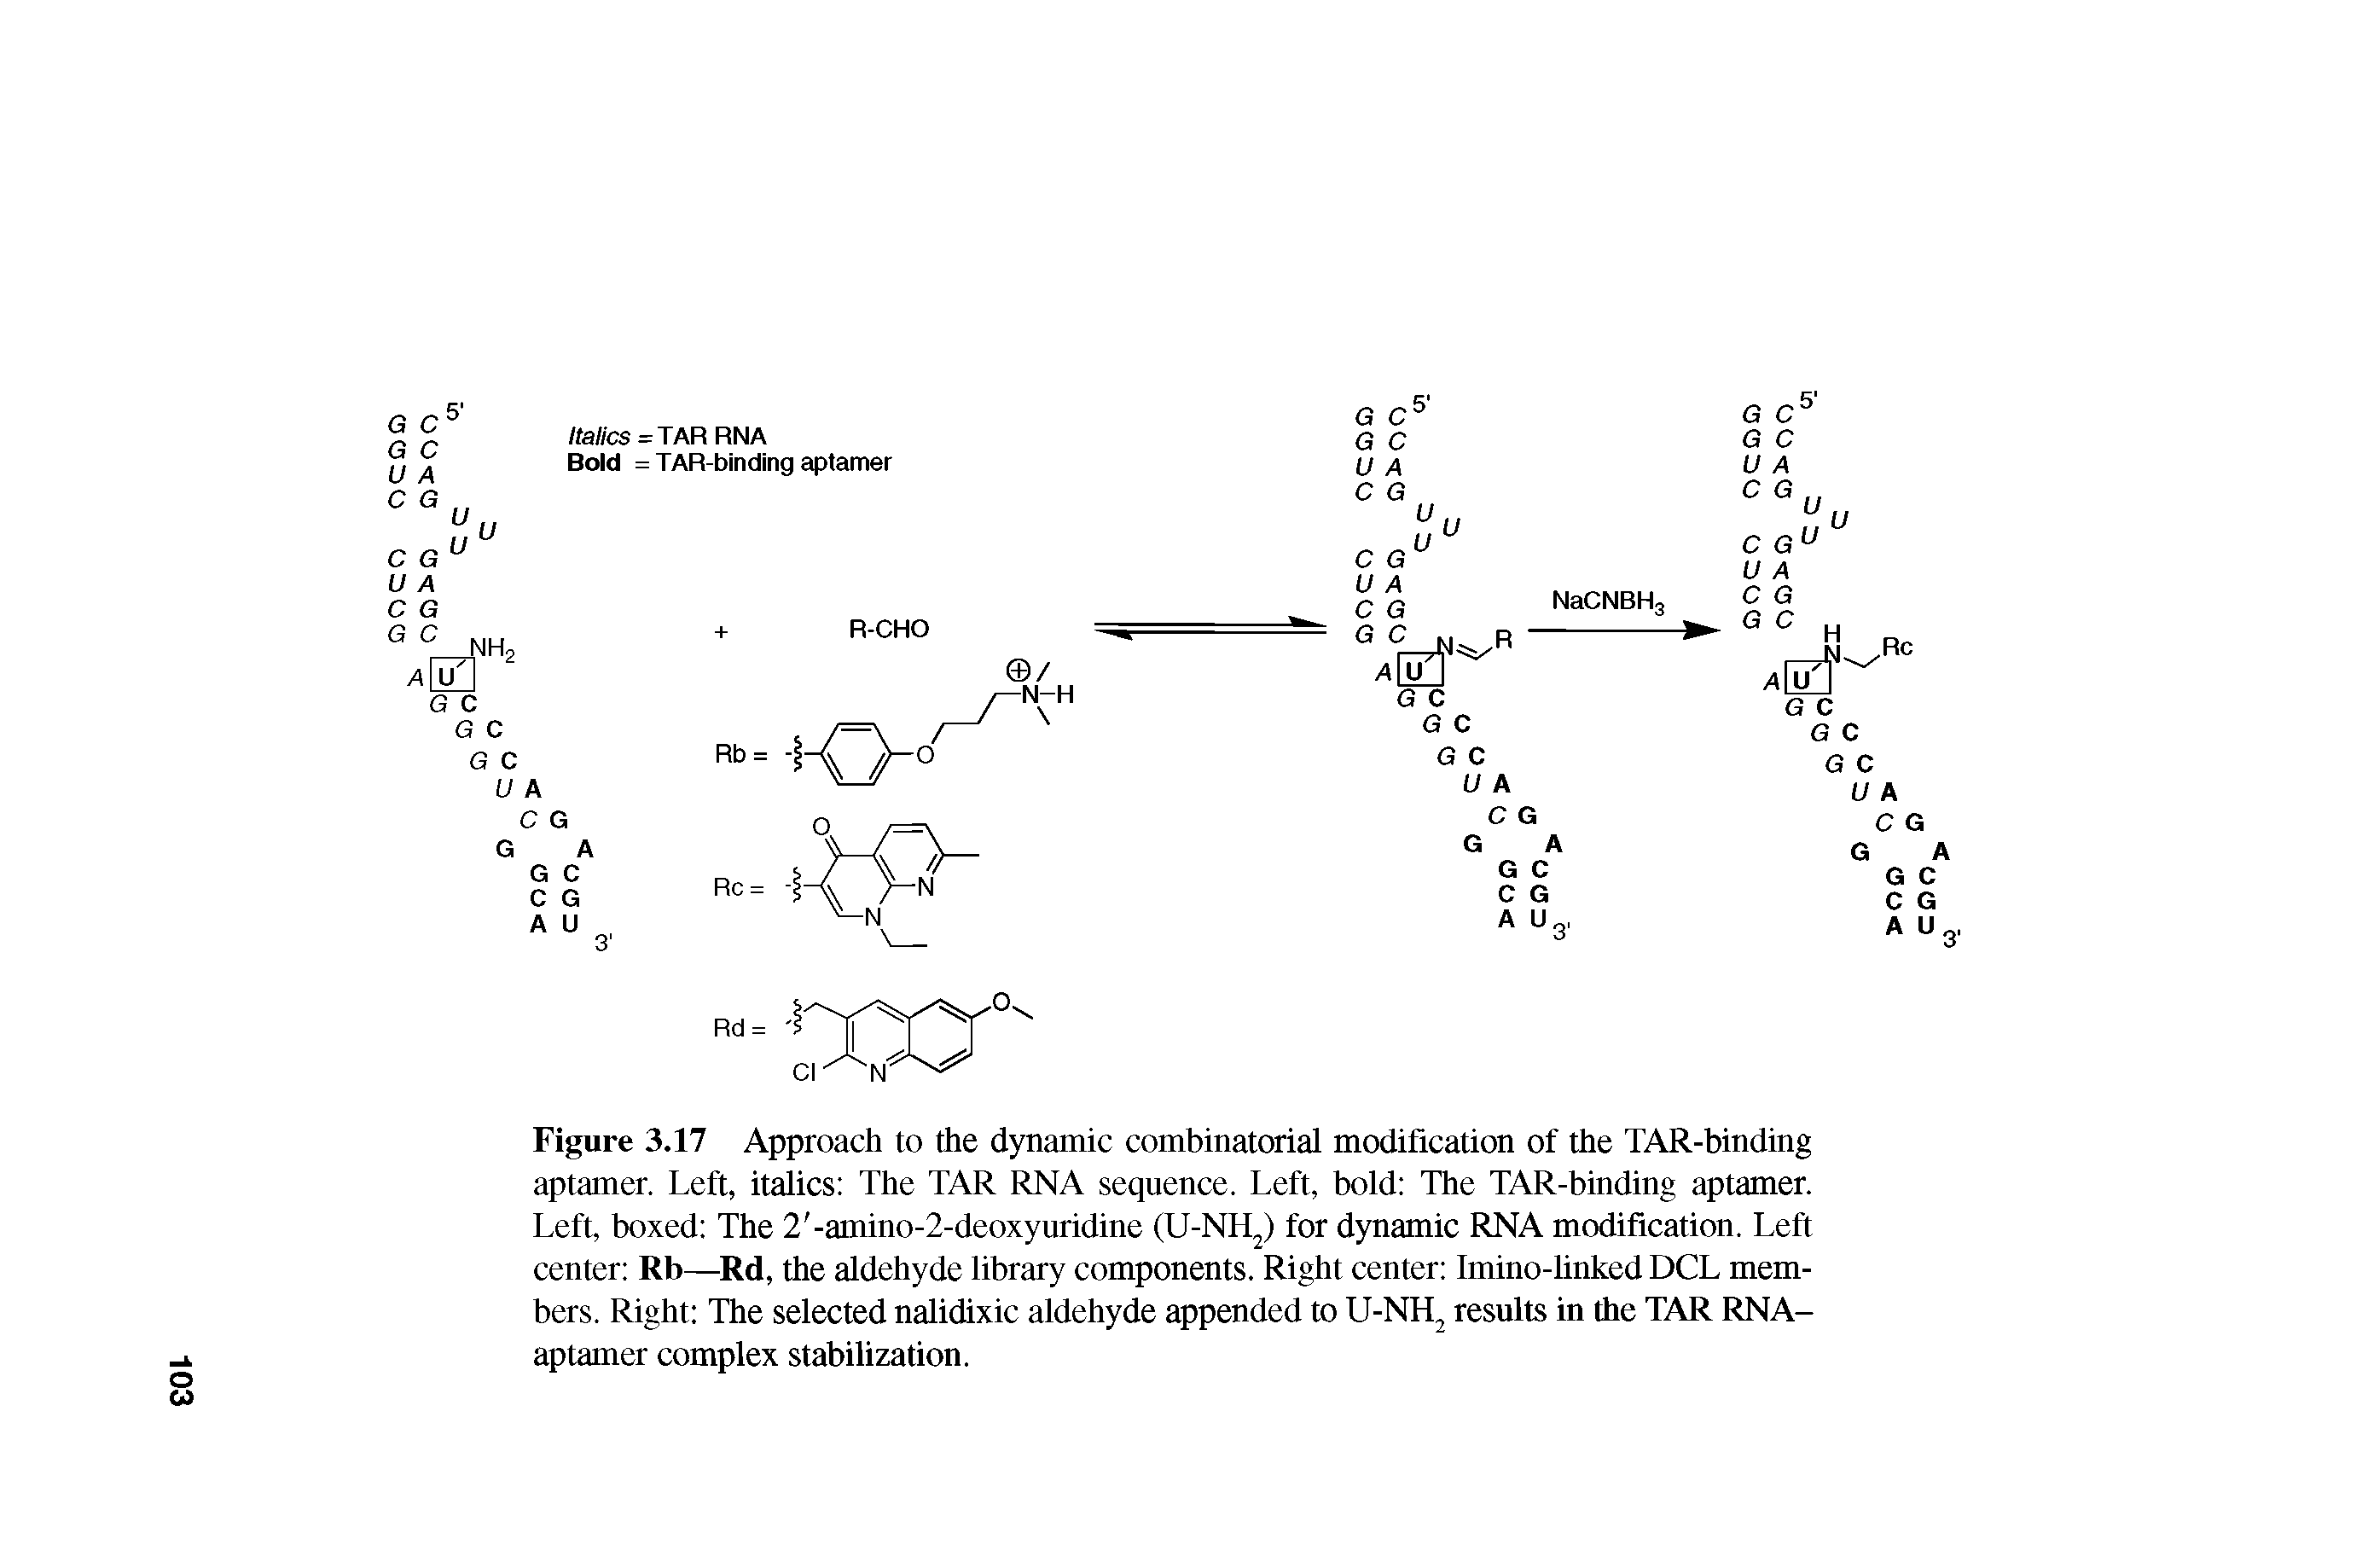 Figure 3.17 Approach to the dynamic combinatorial modification of the TAR-binding aptamer. Left, italics The TAR RNA sequence. Left, bold The TAR-binding aptamer. Left, boxed The 2 -amino-2-deoxyuridine (U-NH ) for dynamic RNA modification. Left center Rb—Rd, the aldehyde library components. Right center Imino-linked DCL members. Right The selected nalidixic aldehyde appended to U-NH results in the TAR RNA-aptamer complex stabilization.